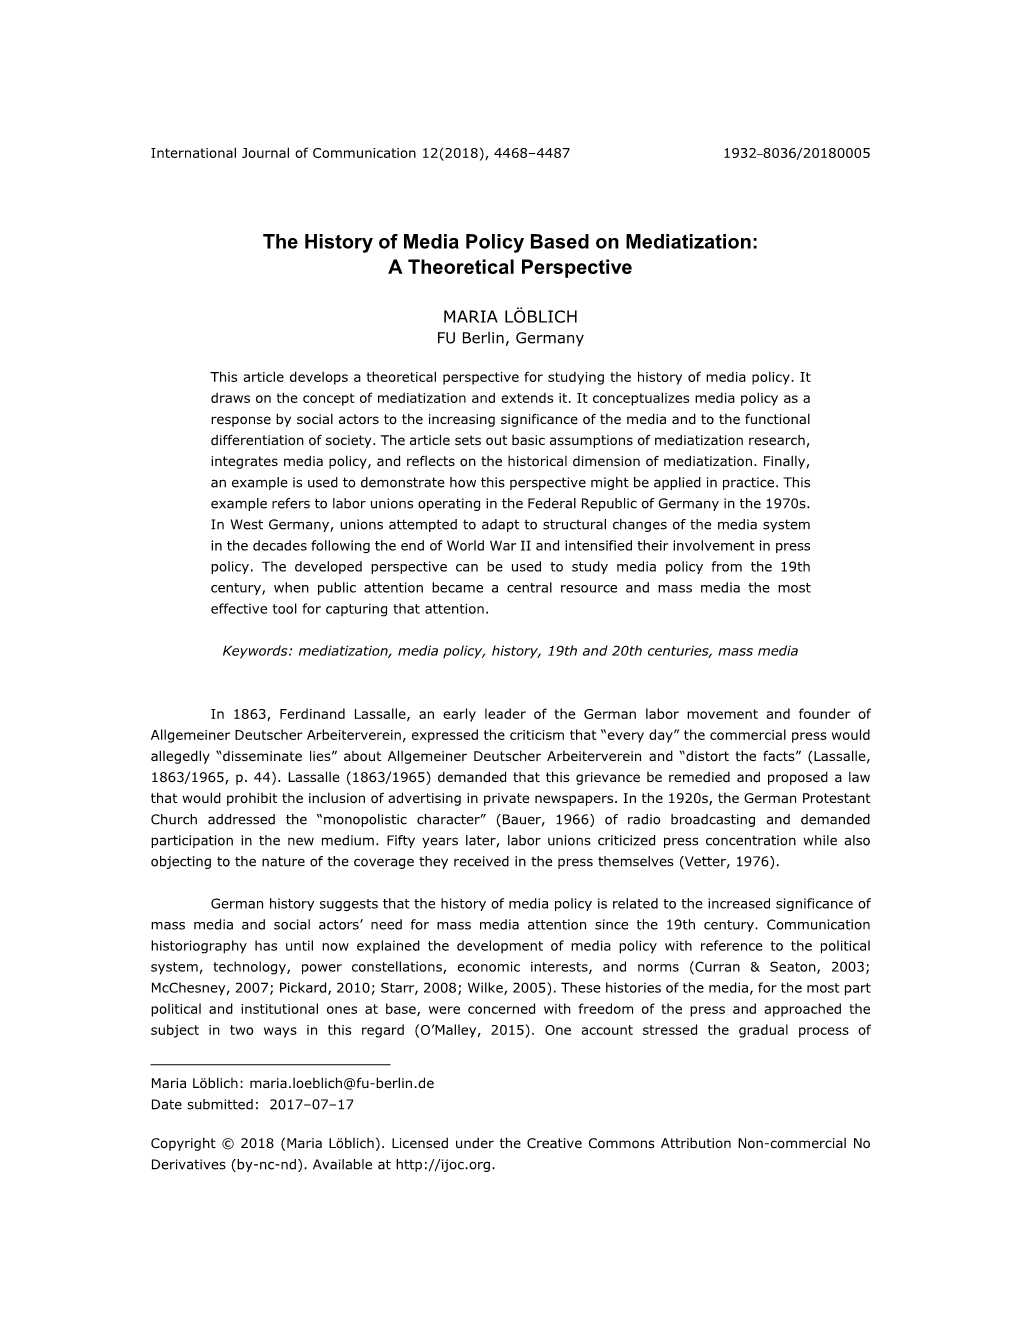 The History of Media Policy Based on Mediatization: a Theoretical Perspective